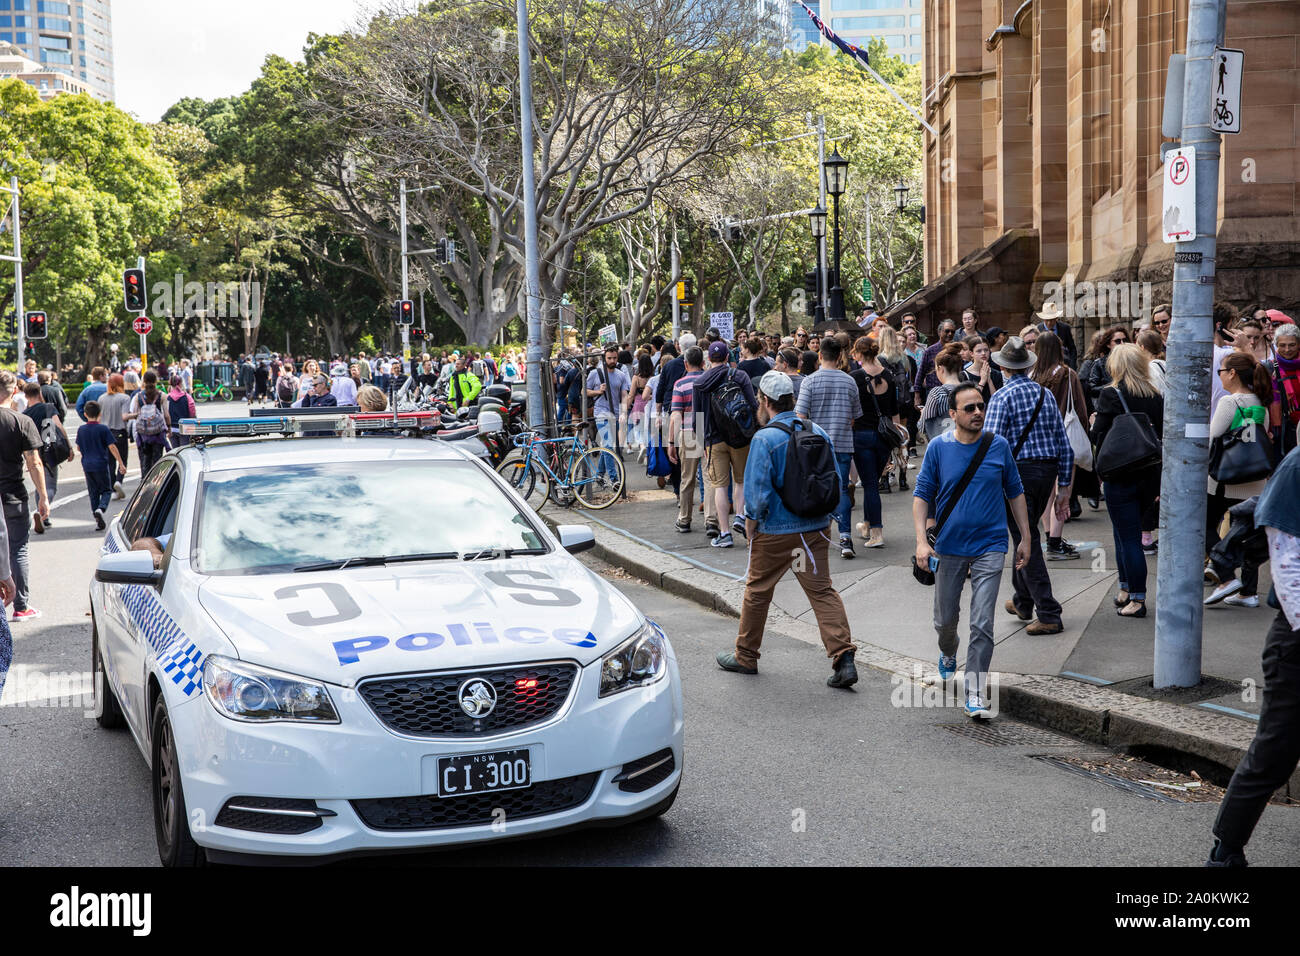 Sydney, police car drives between protestors at the Sydney climate change strike rally,nsw,Australia Stock Photo